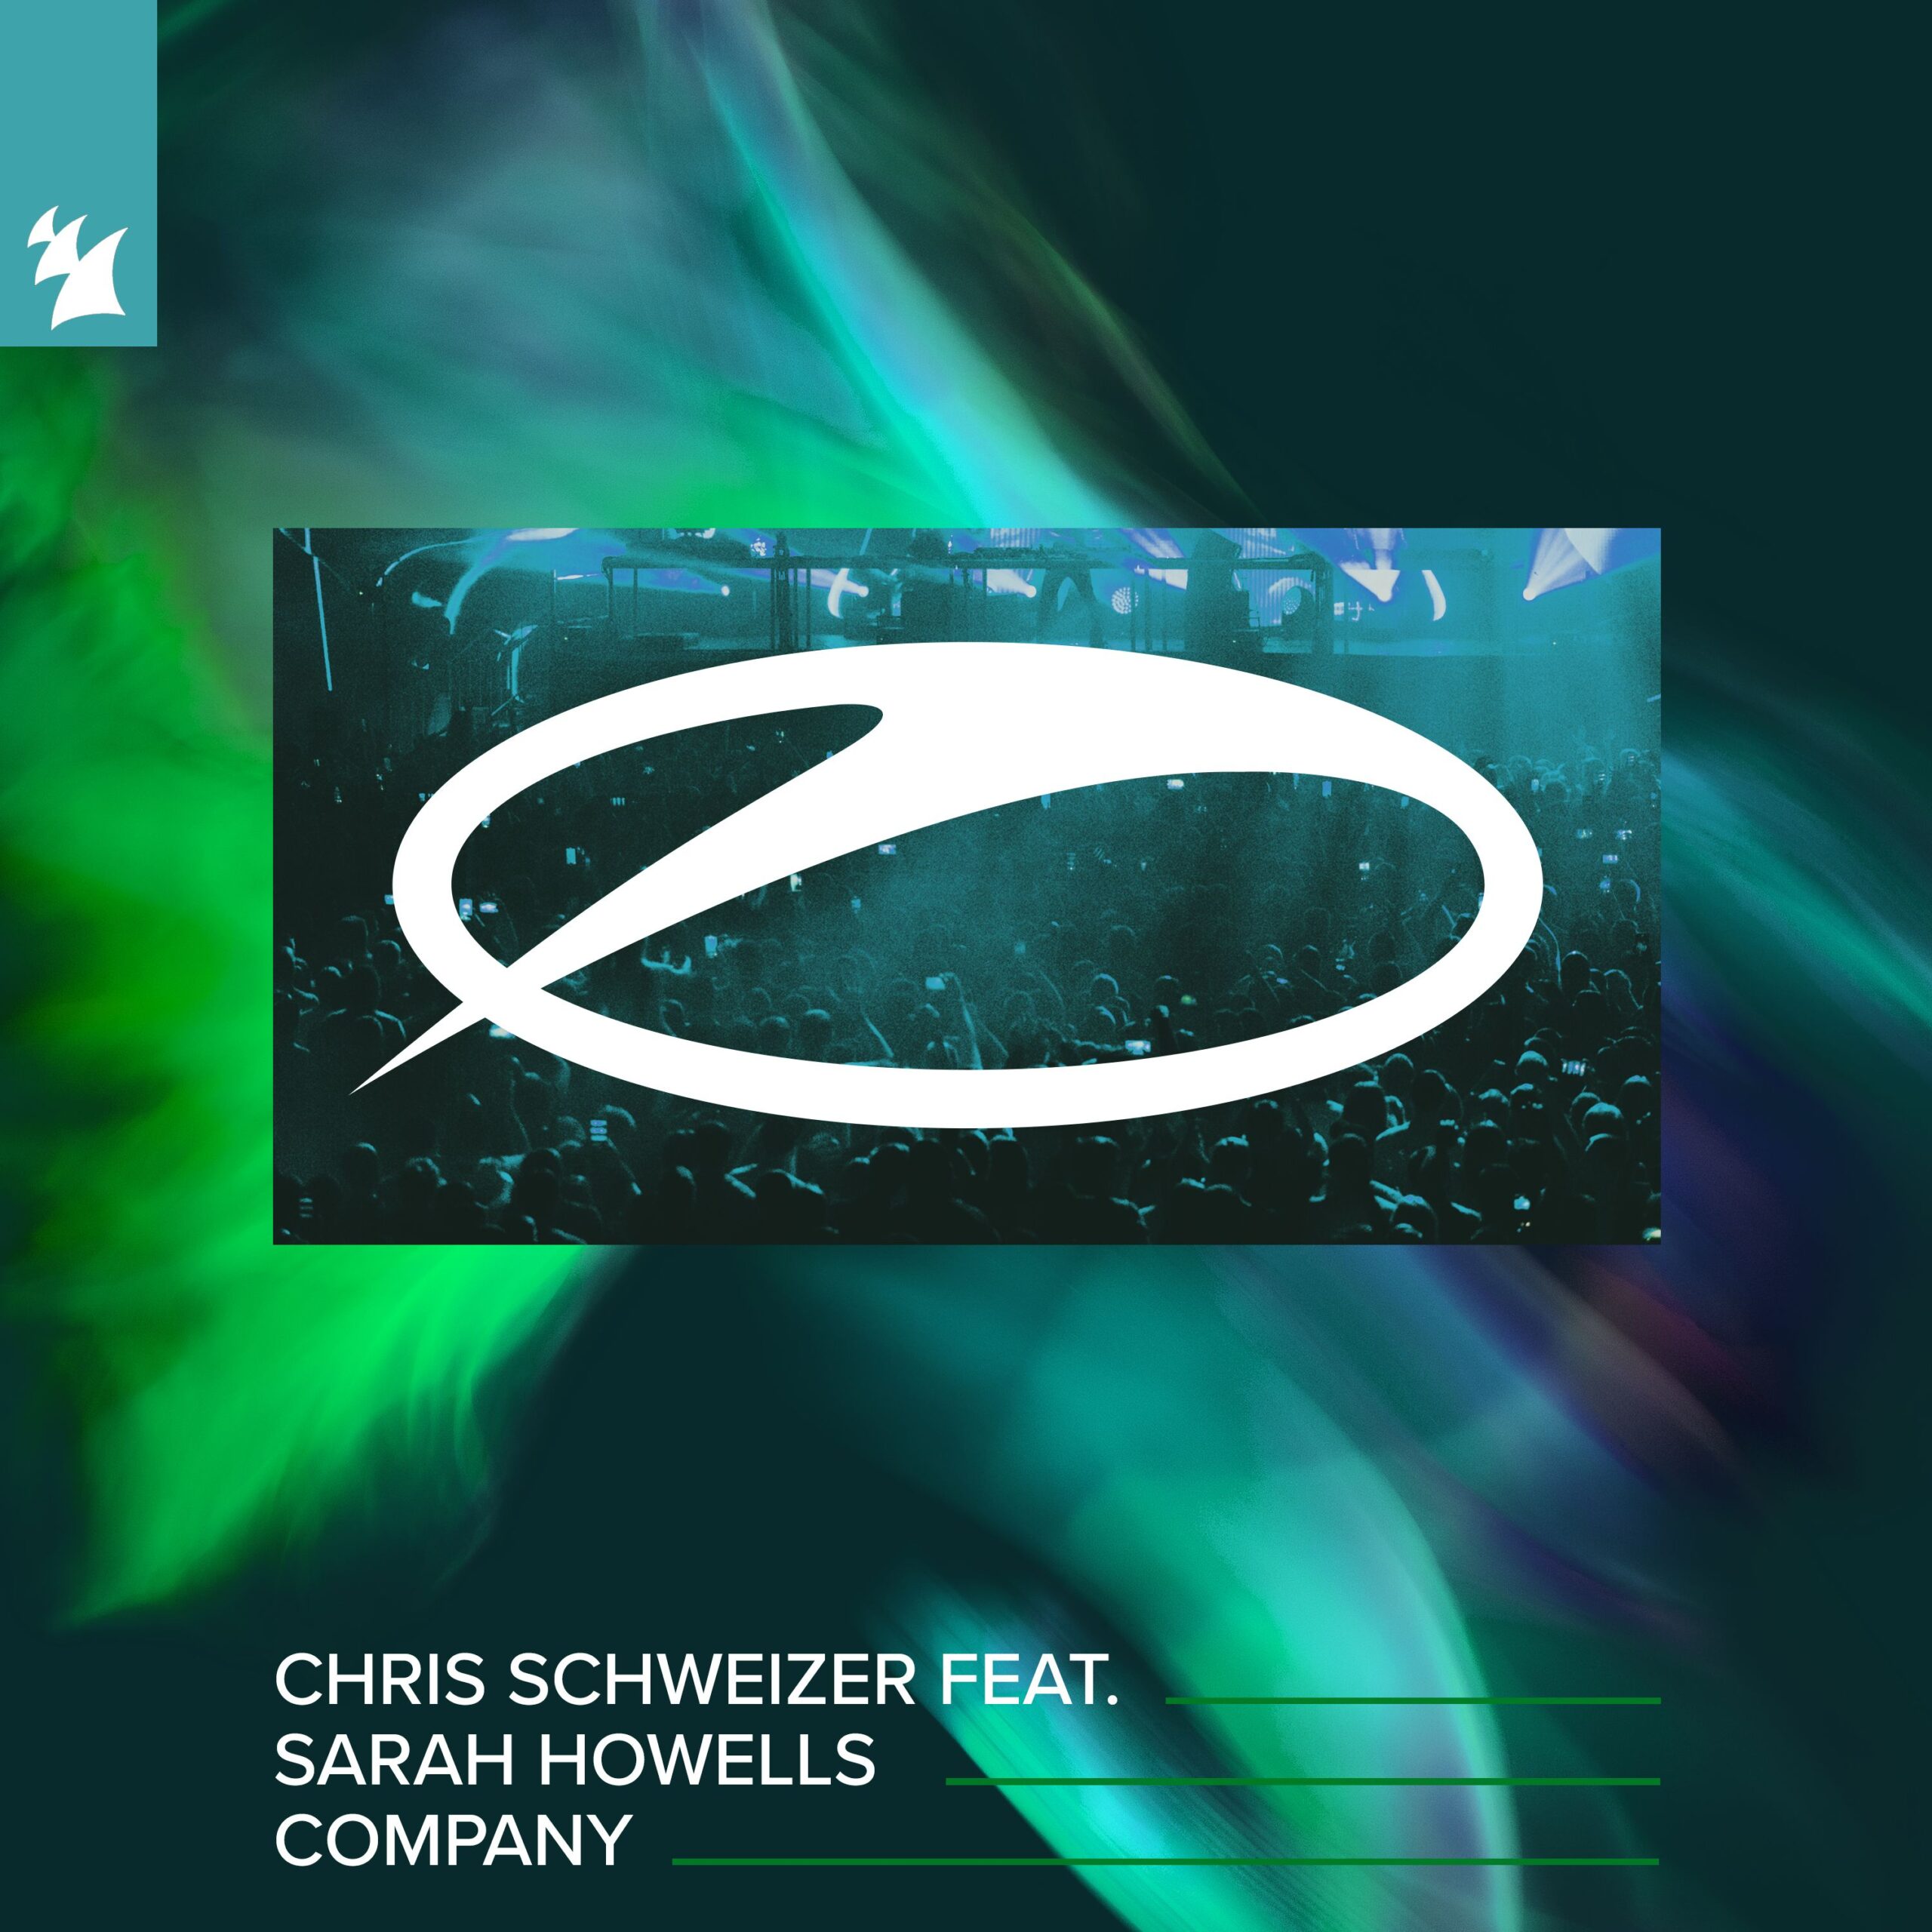 Chris Schweizer feat. Sarah Howells presents Company on A State Of Trance